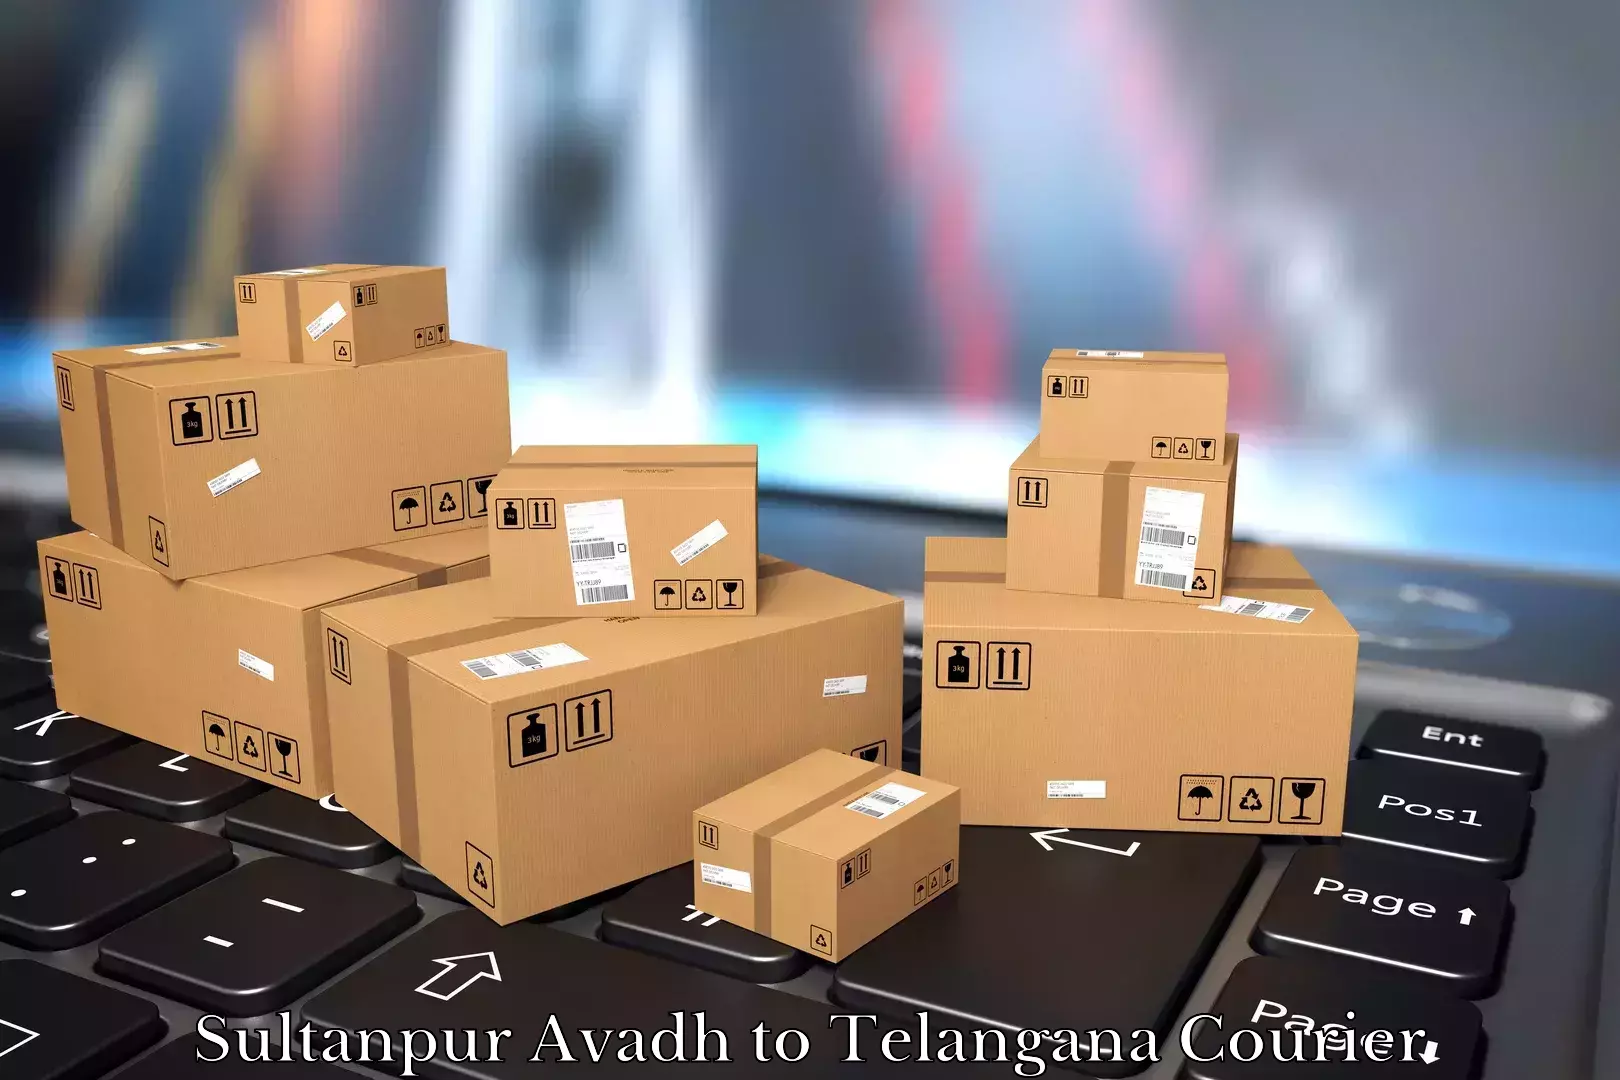 Furniture delivery service Sultanpur Avadh to Warangal